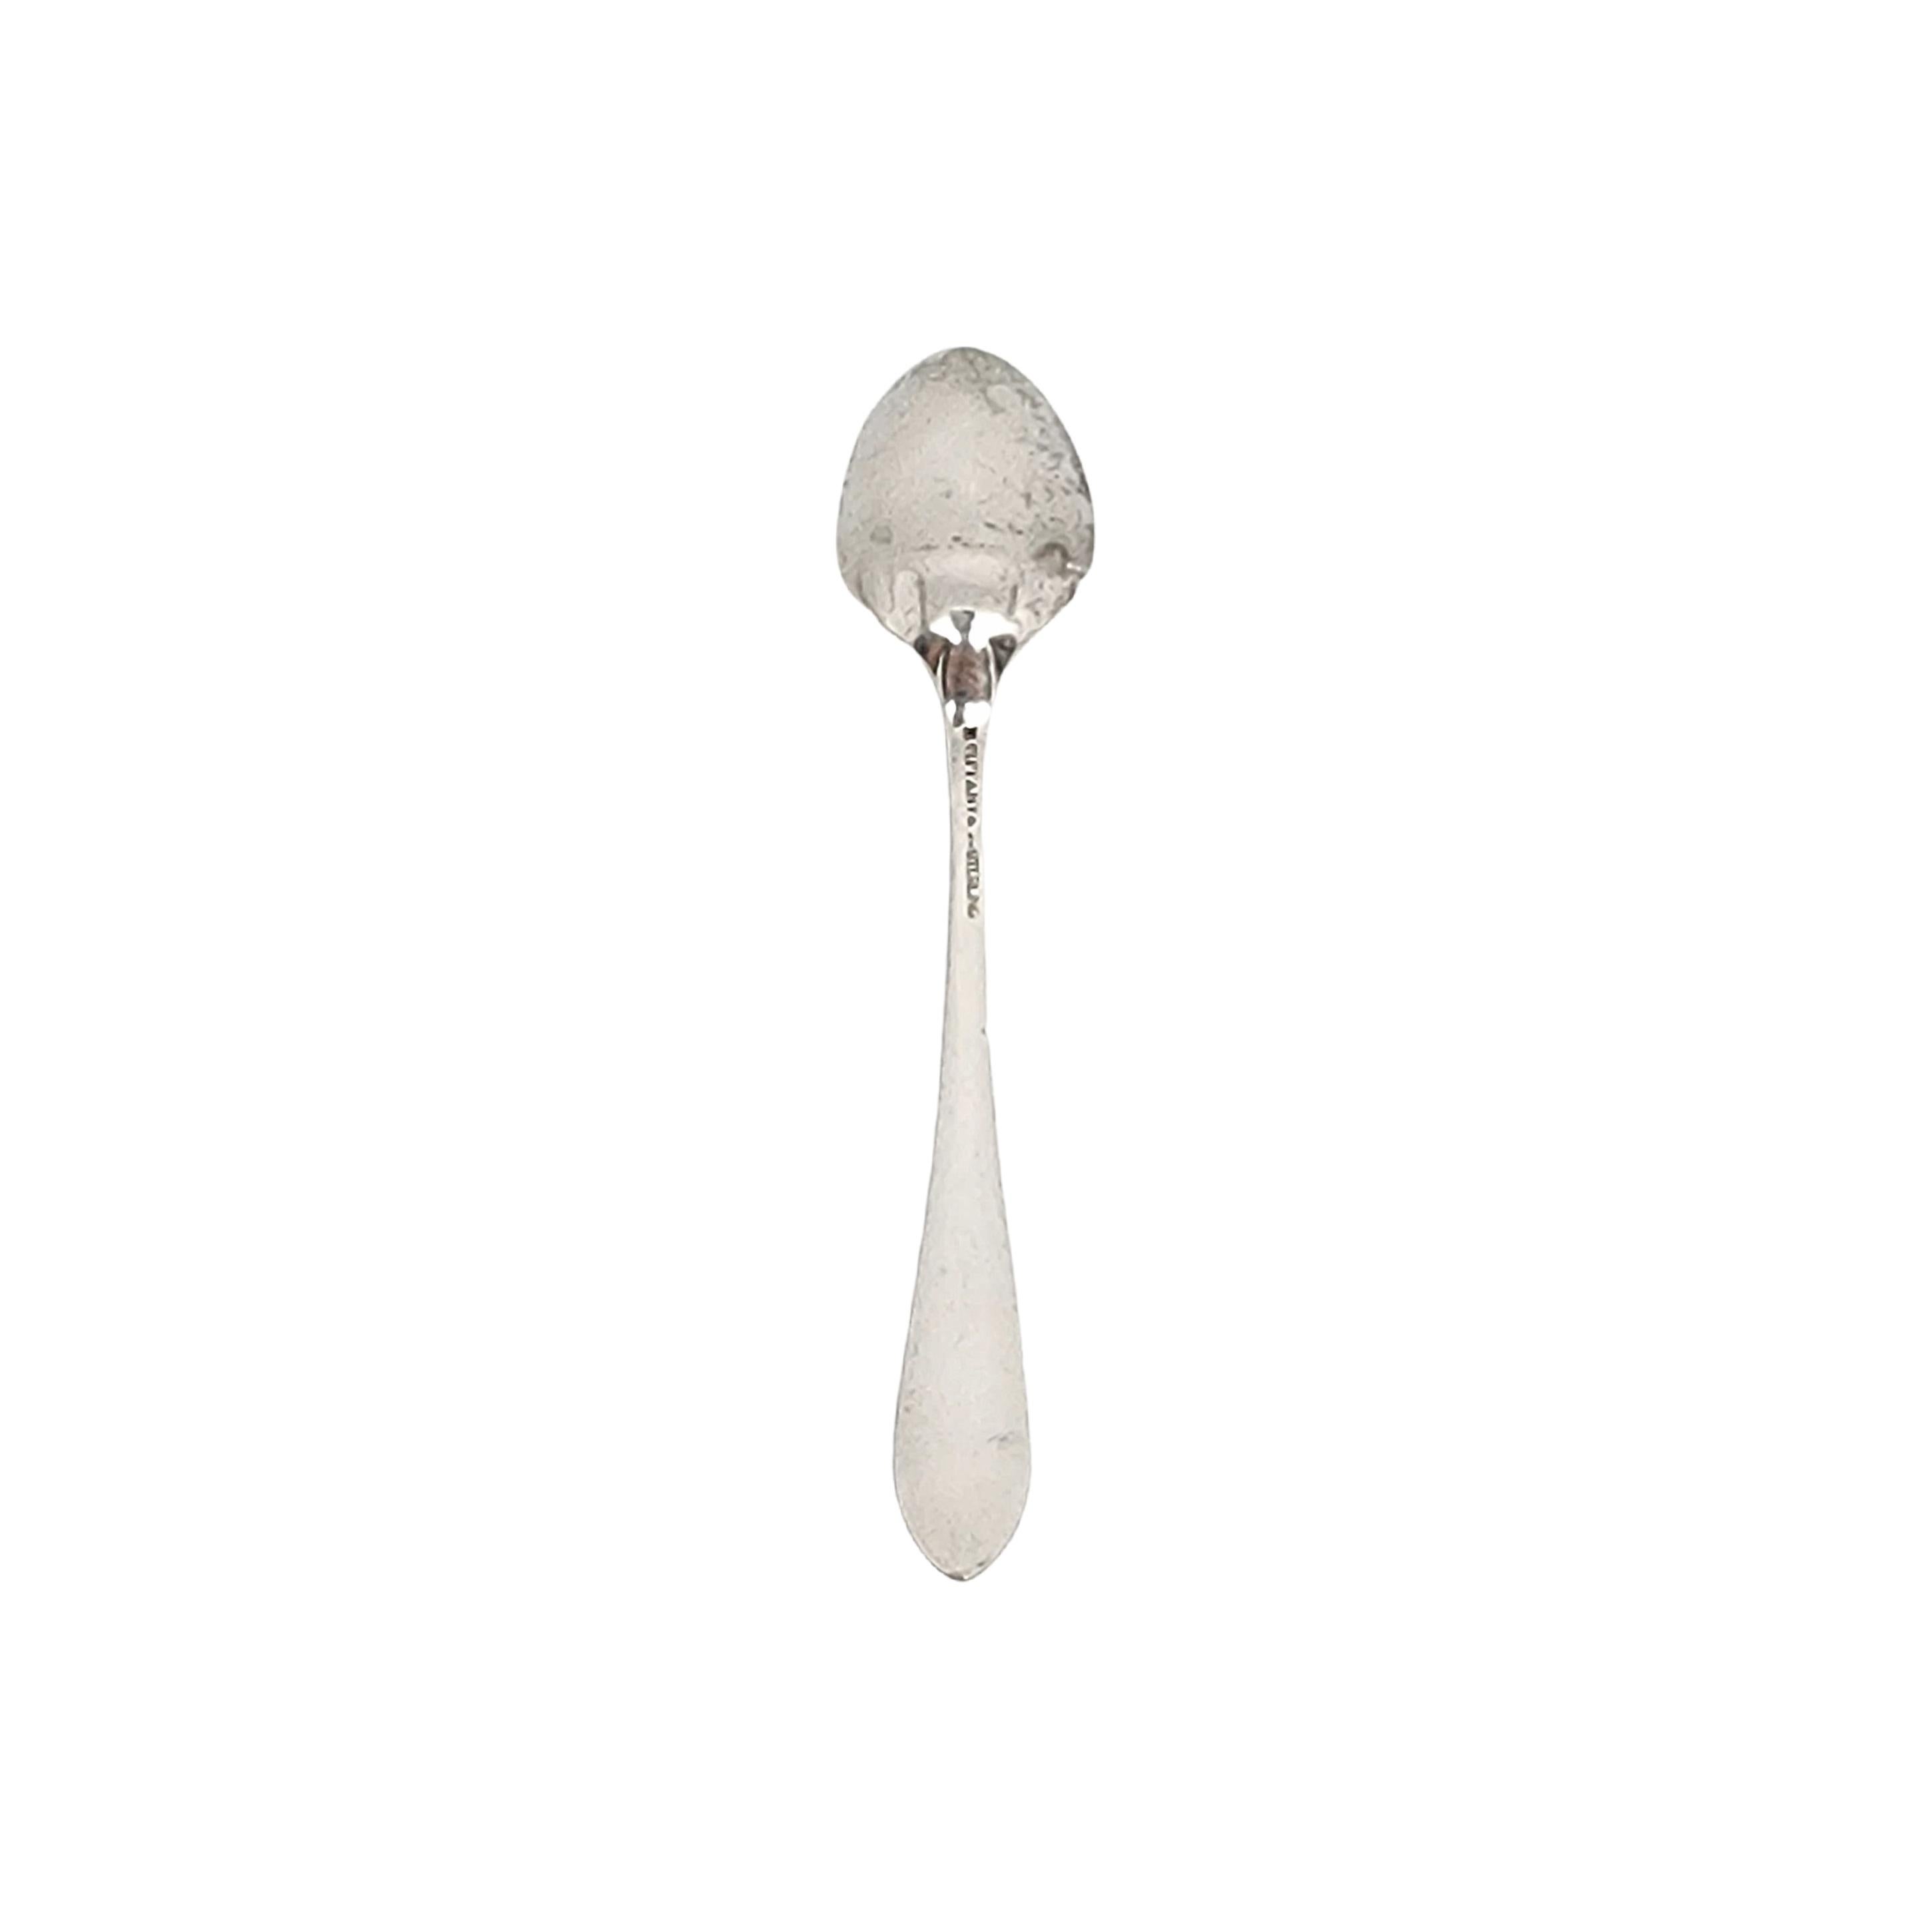 Sterling silver demitasse spoon by Tiffany & Co in the Faneuil pattern with monogram

Monogram appears to be D

The Faneuil pattern was in production from 1910-1955 and was named for Faneuil Hall in Boston, MA. The pattern's simple and elegant